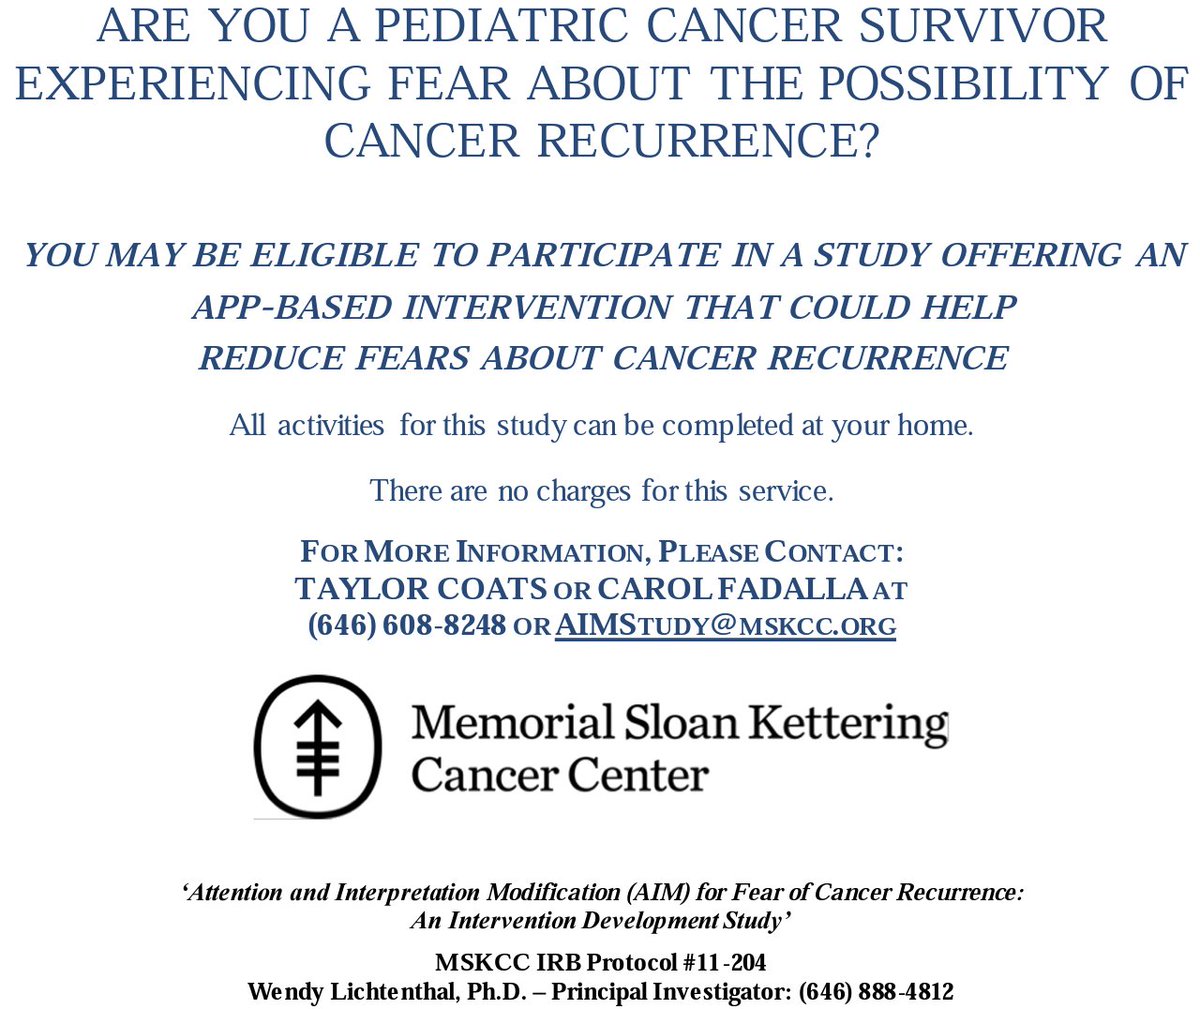 Our friends @sloan_kettering are studying a digital therapeutic for #pediatriccancer survivors w fear of recurrence, info @ 646-608-8248 or aimstudy@mskcc.org, thanks for sharing!
 
@PediatricCancer @ChildhoodCancer #ayacsm #yacancer #survonc #cancermoonshot #CommunityOncology